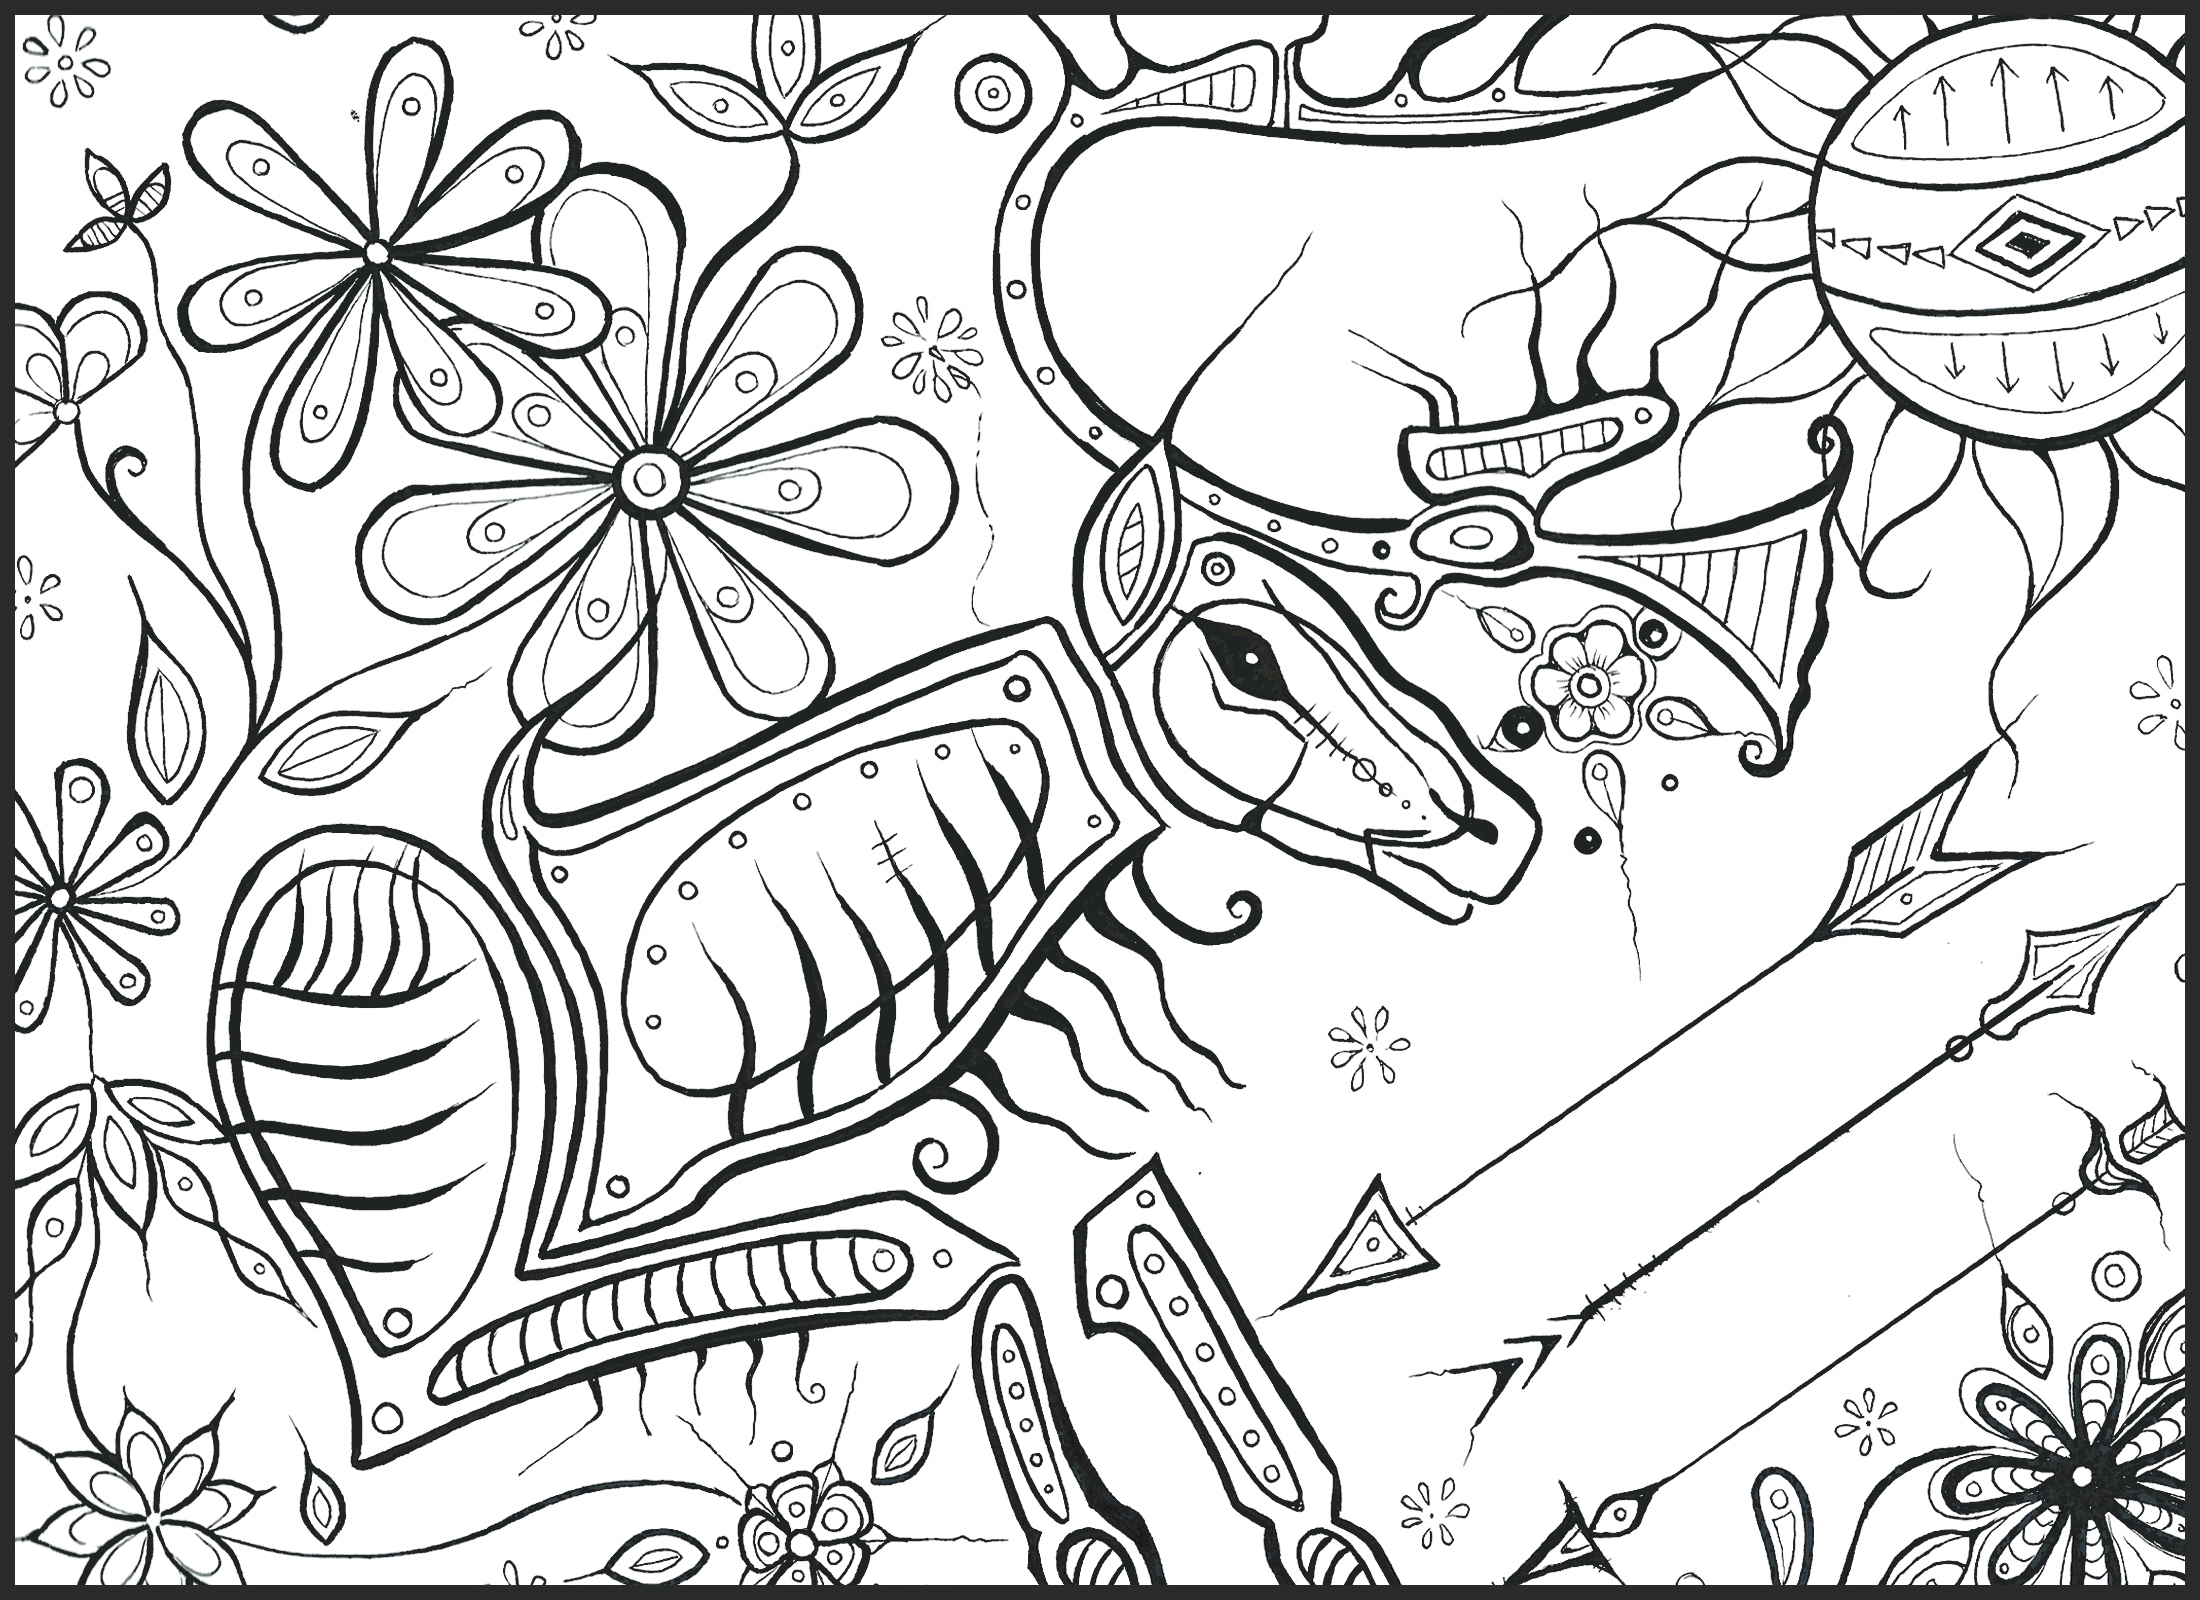 Colouring It Forward – Native Canadian Art – Coloring Books